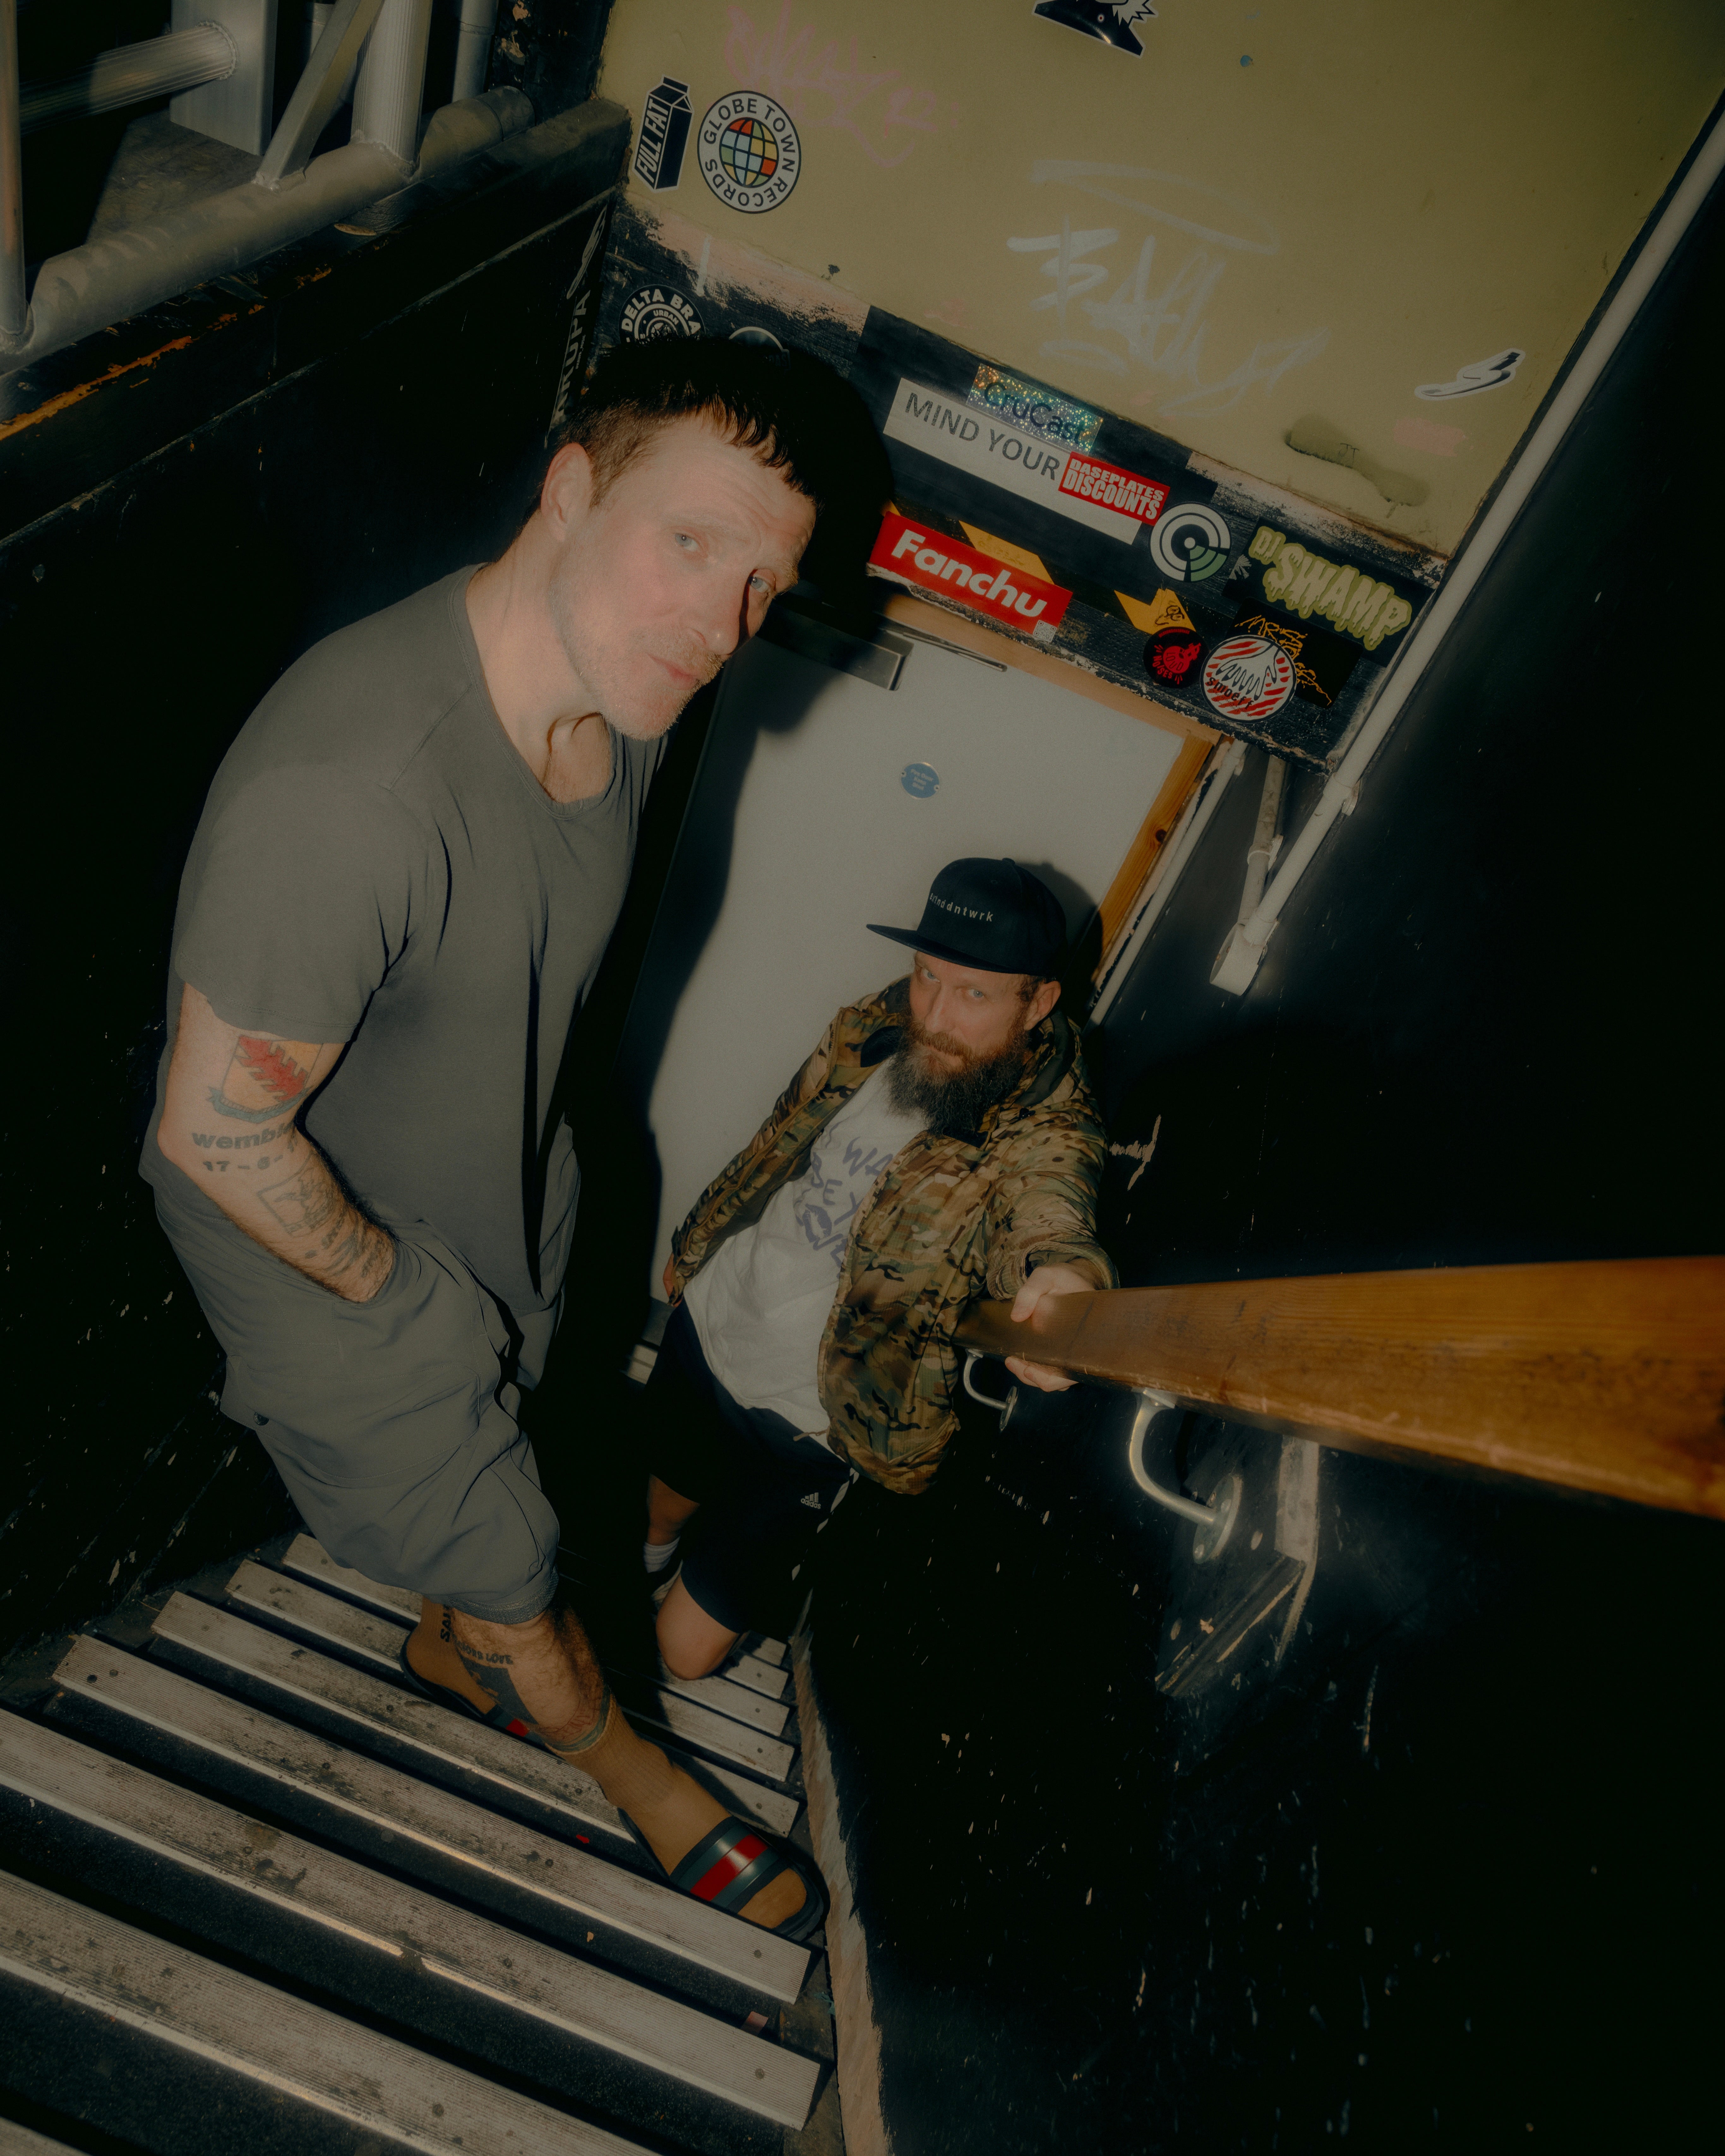 Sleaford Mods in Exeter promo photo for Priority from O2 presale offer code